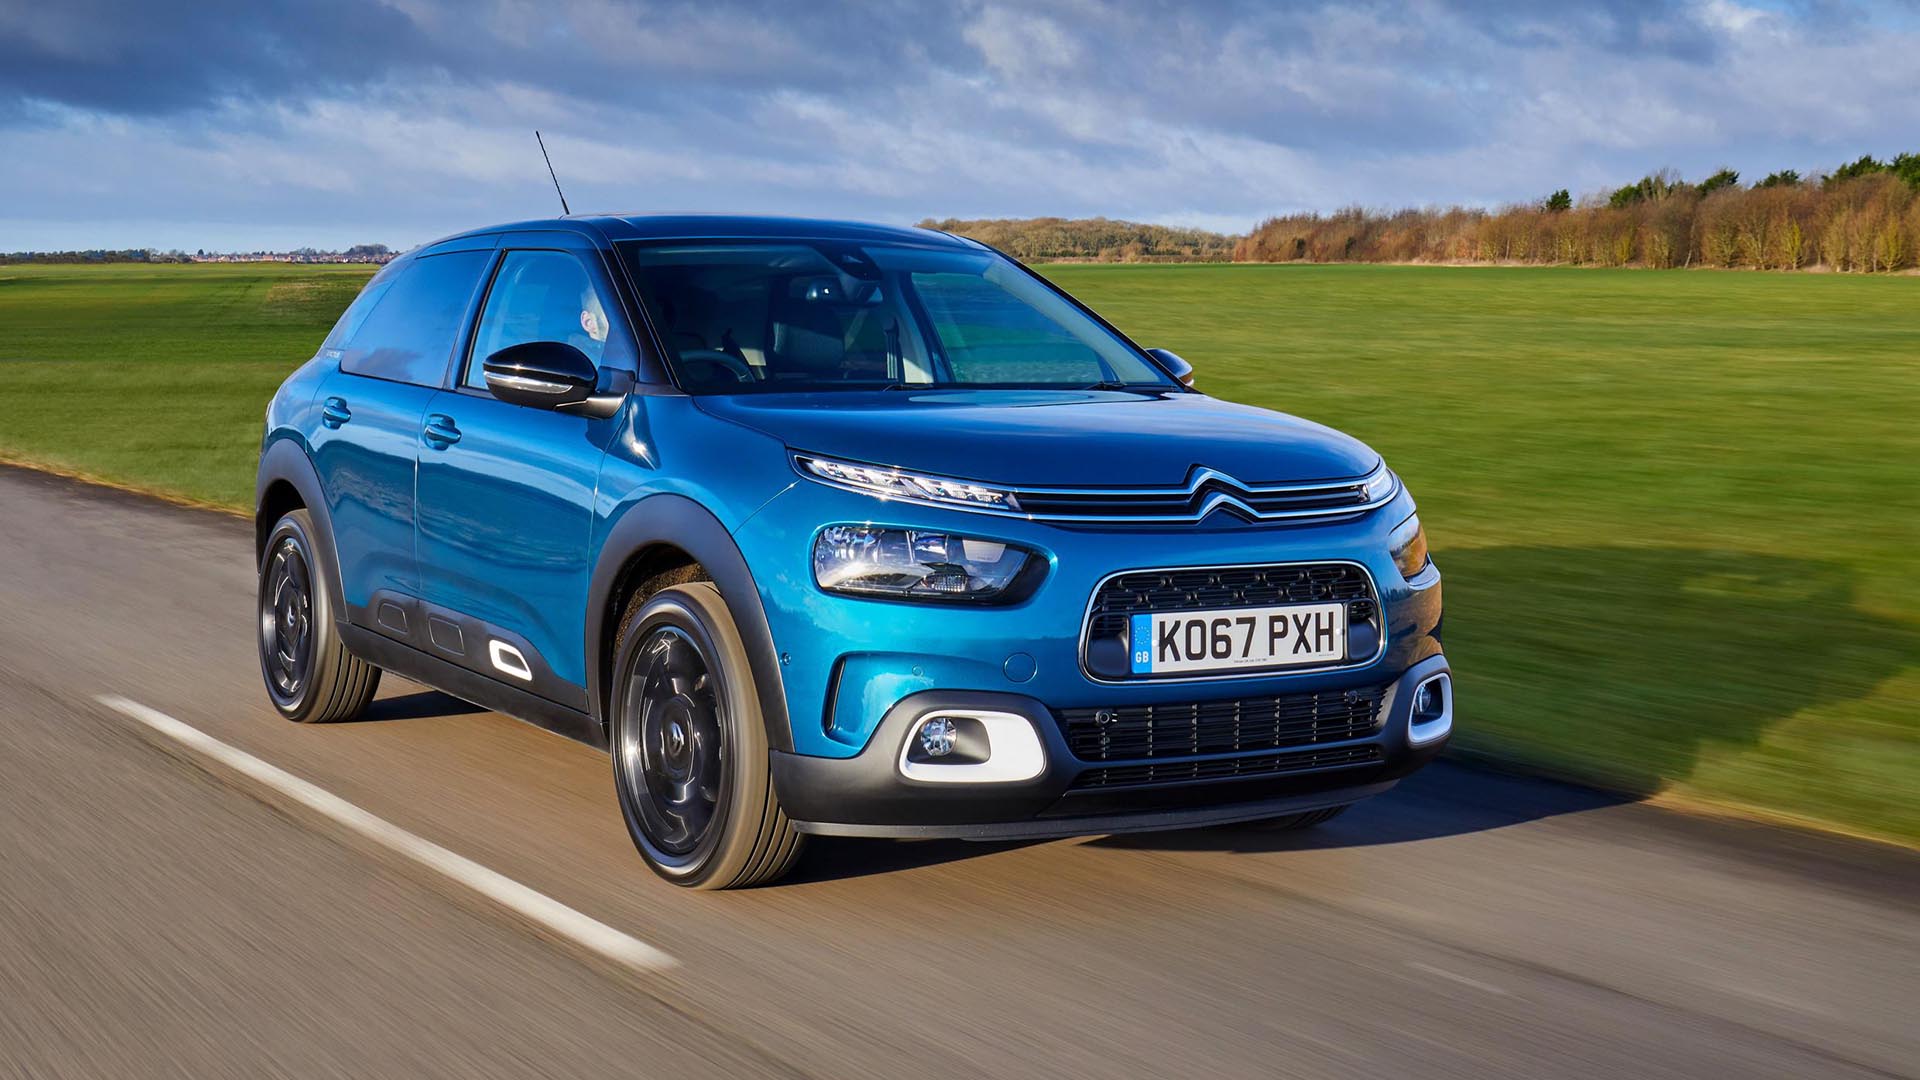 Citroen C4 Cactus Flair Used Cars For Sale | Autotrader Uk